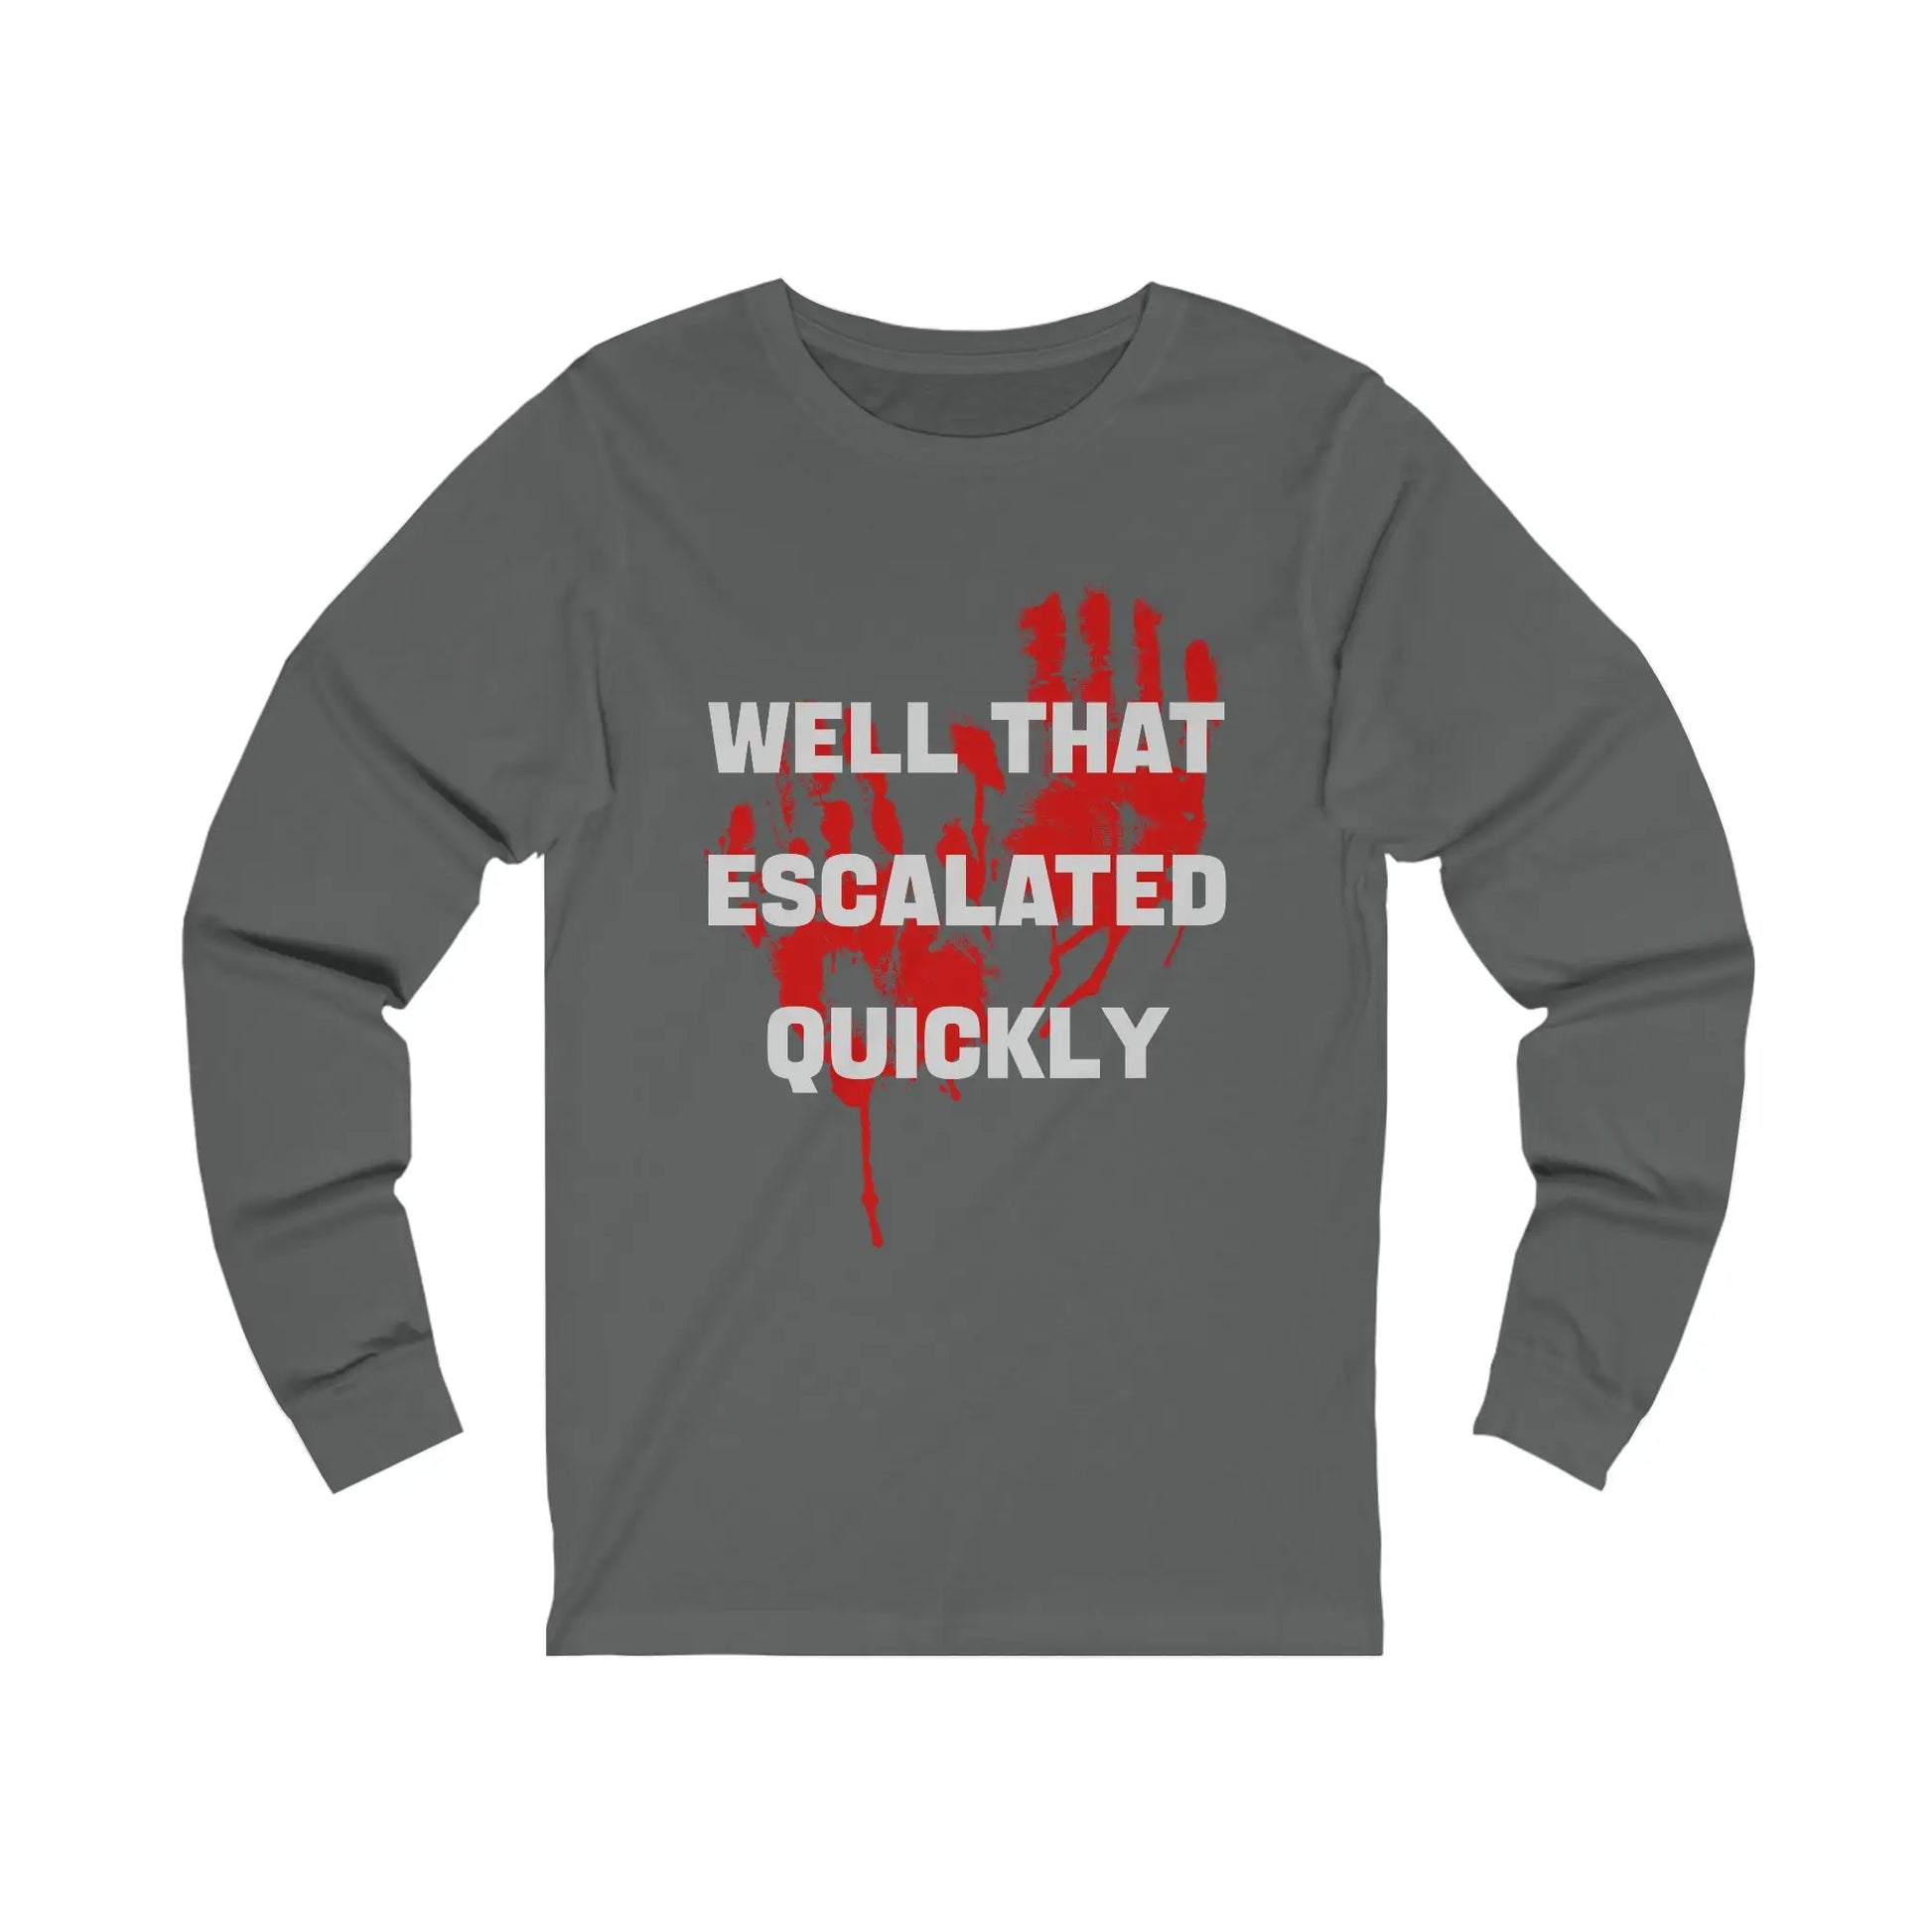 Well That Escalated Quickly Men's Long Sleeve - Wicked Tees